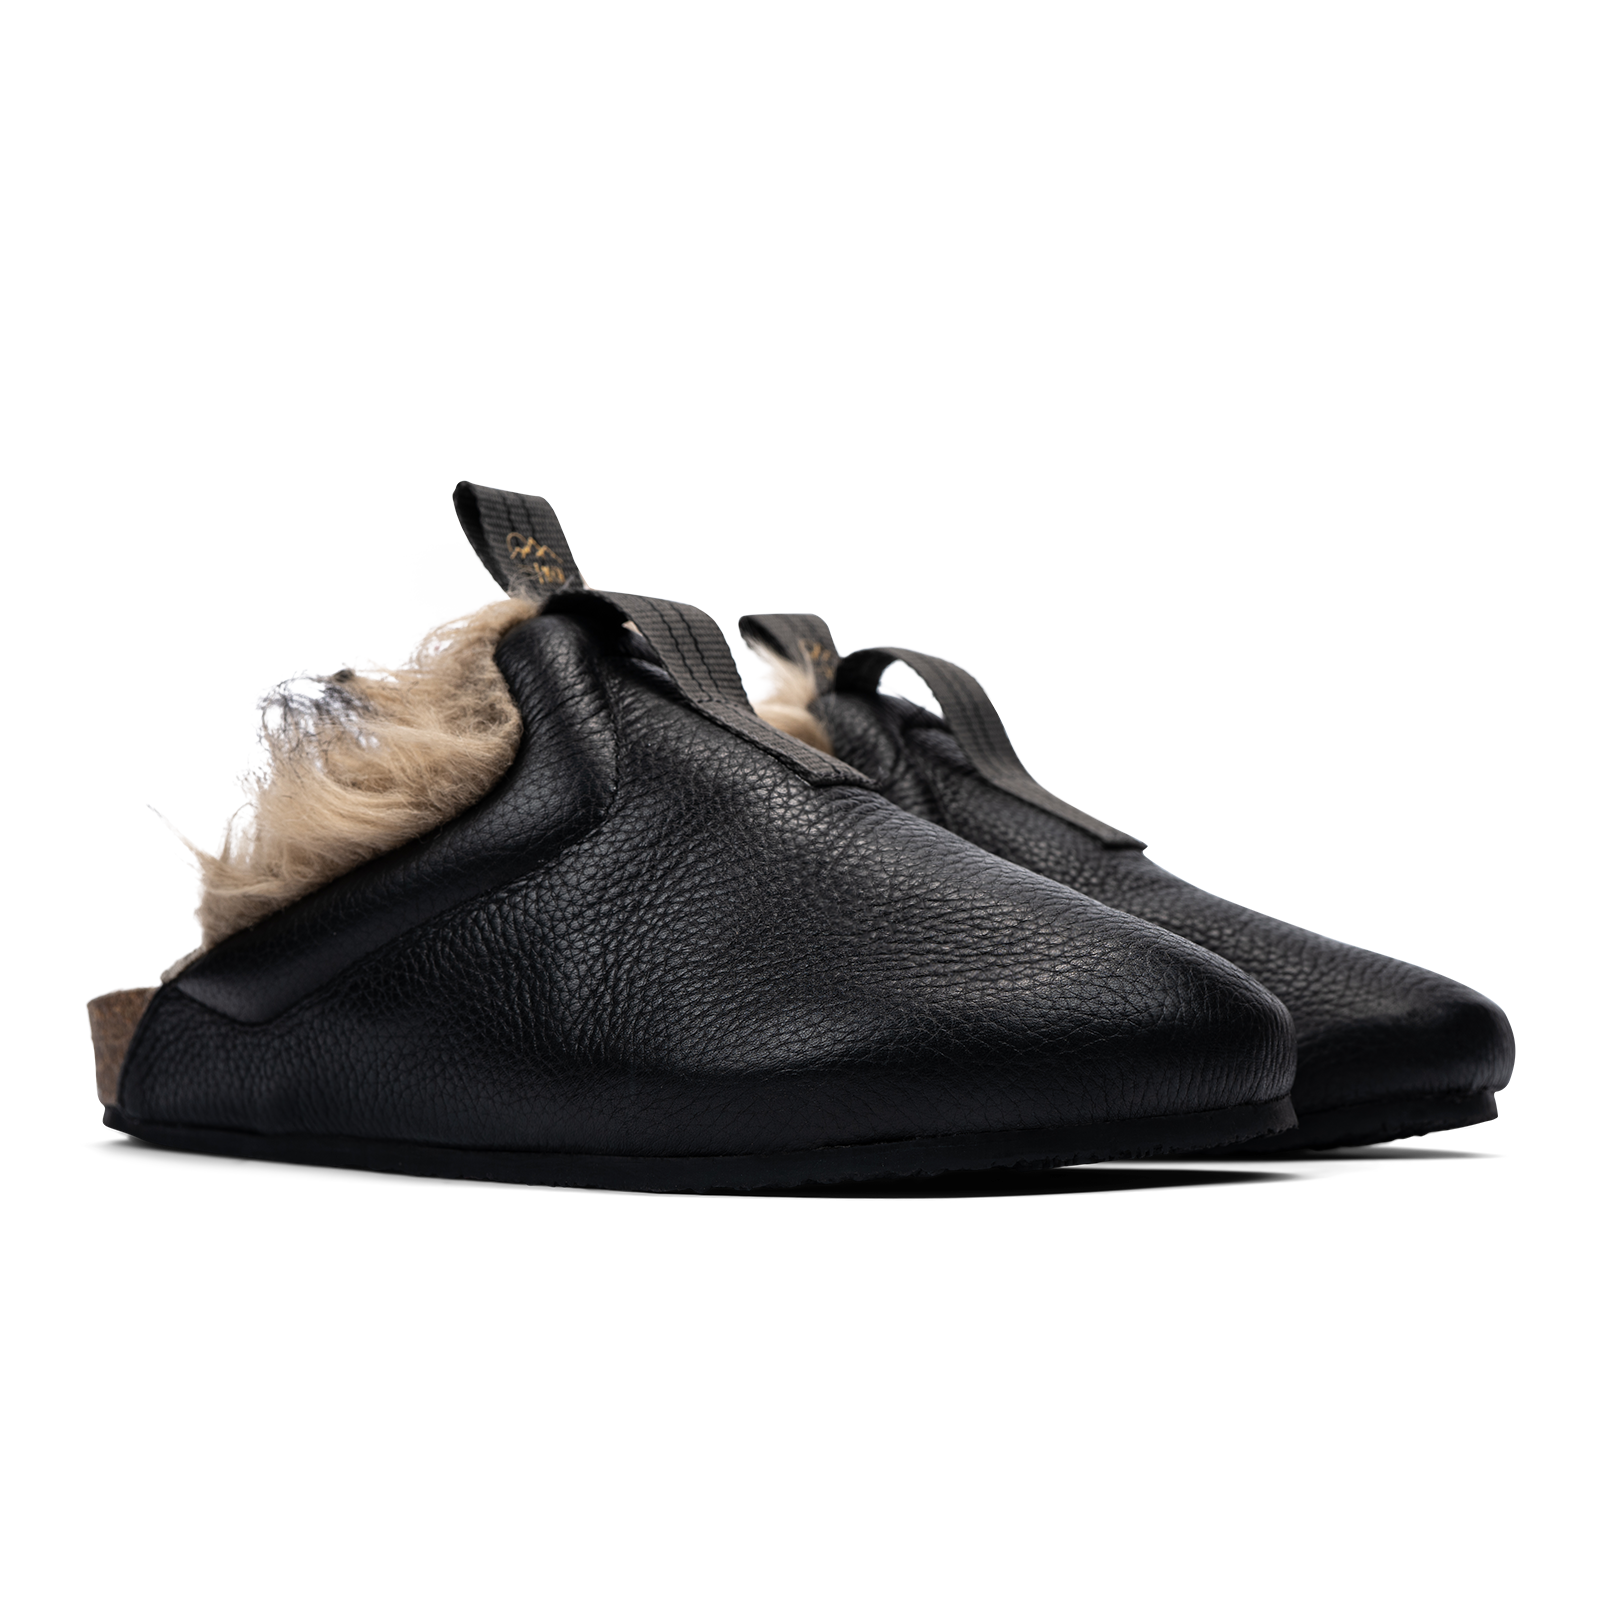 3/4 view  Bantha Himalya is a Mule with faux fur lining. - Black tumbled leather upper and vibram sheet rubber bottom.